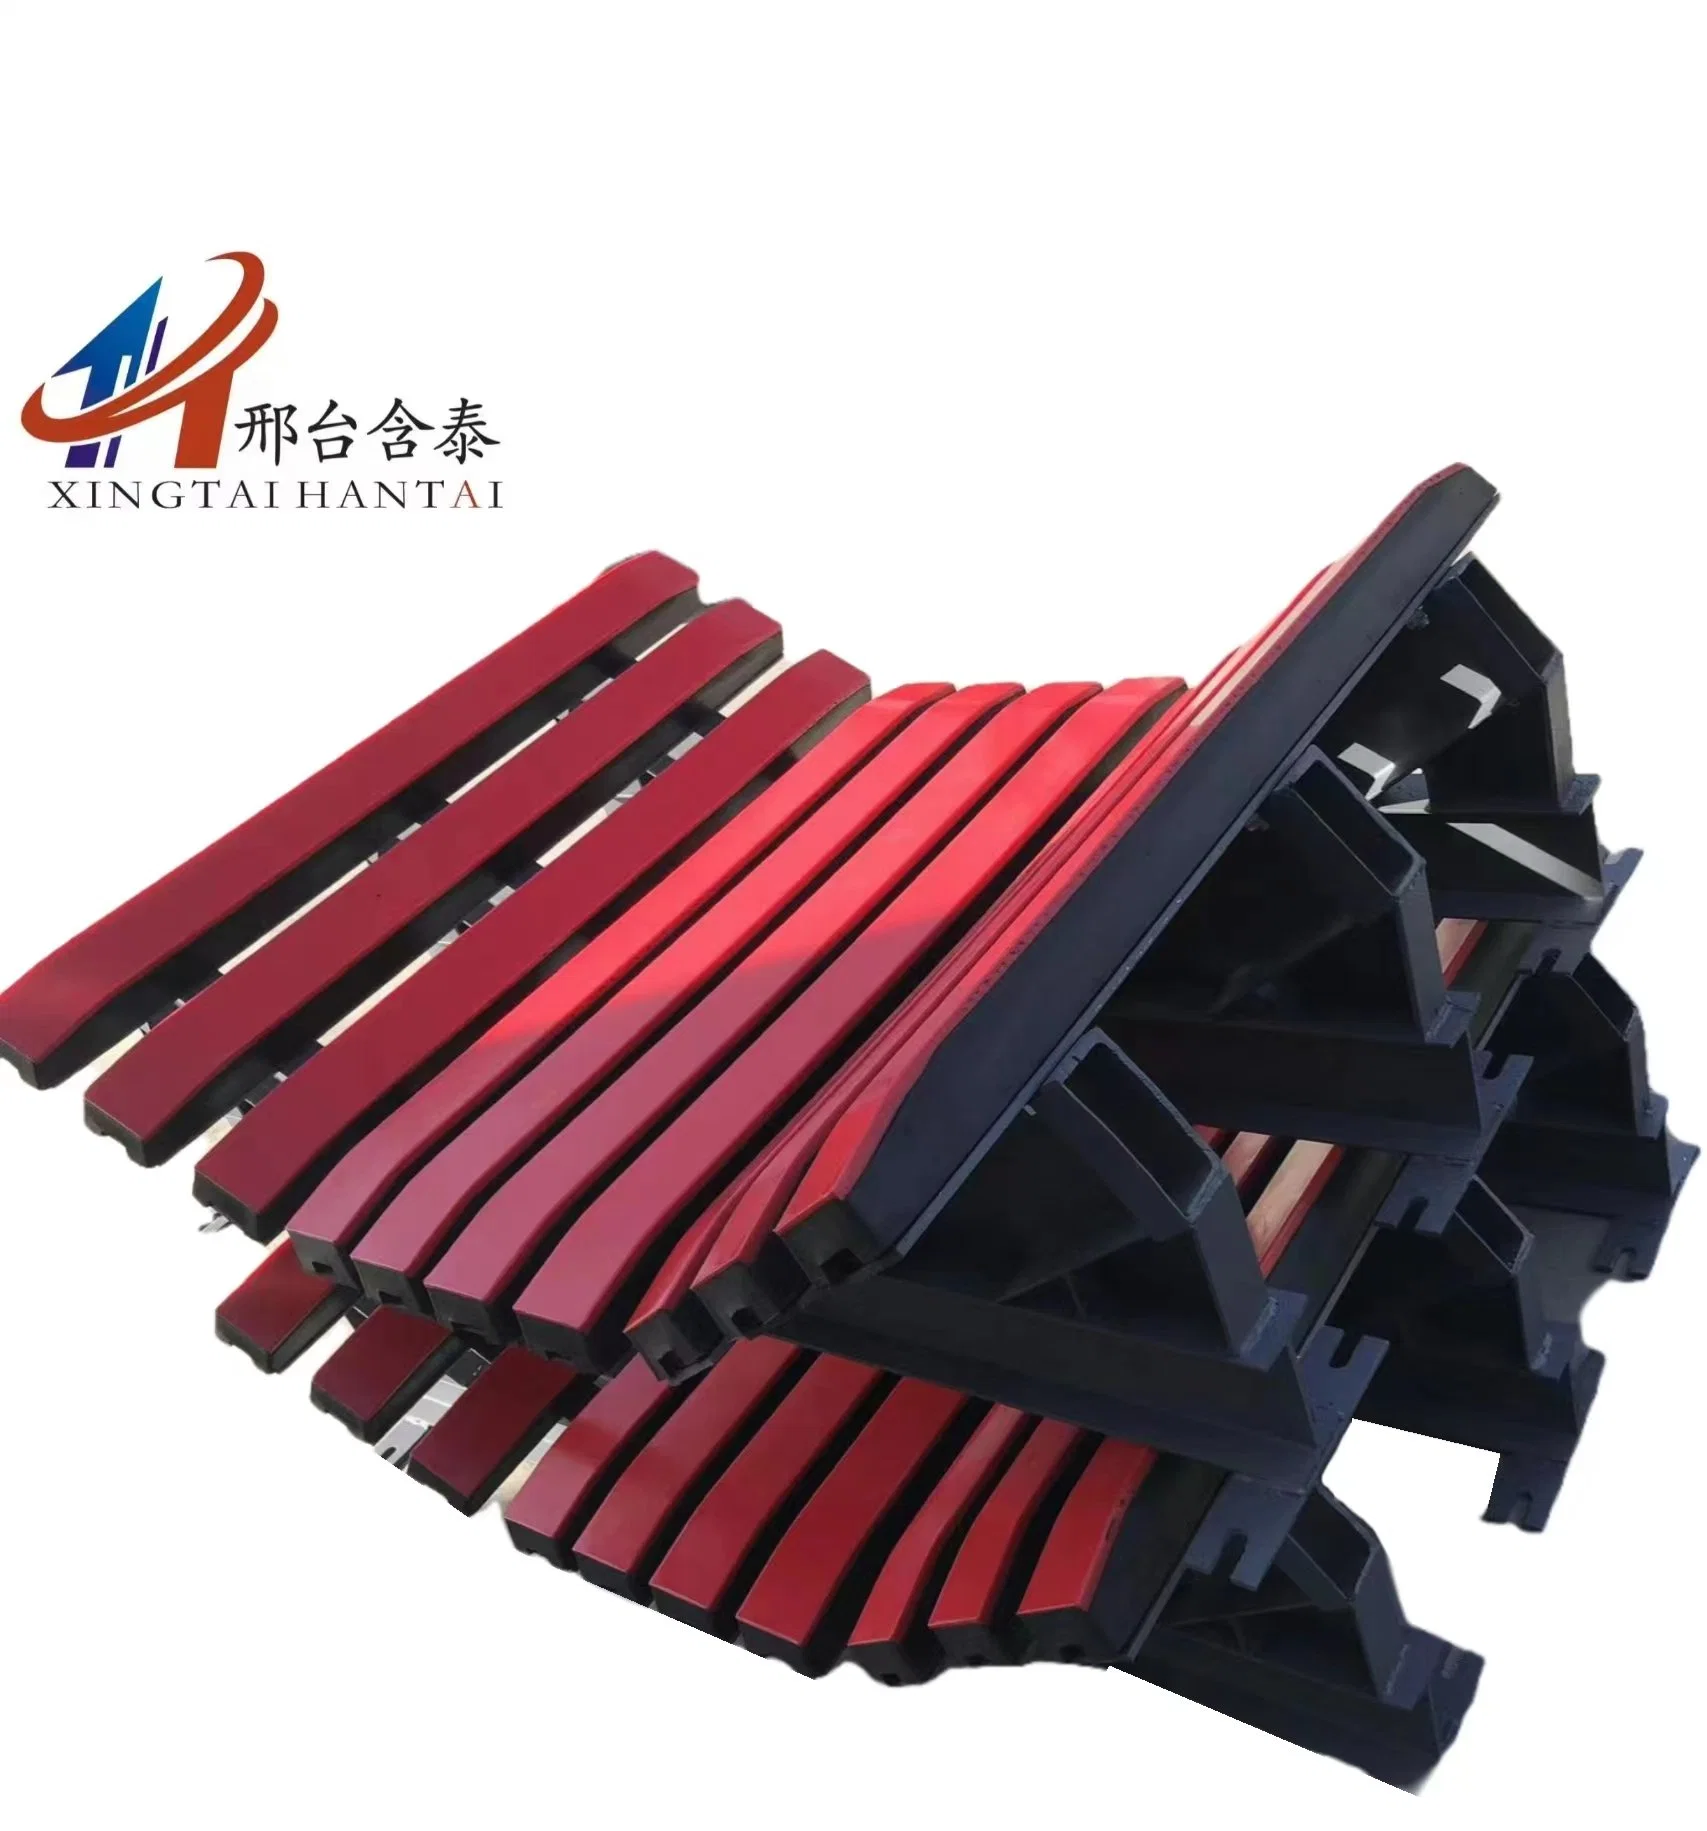 Coal Mine Special Ultra High Molecular Weight Polyethylene Wear-Resistant Impact Bed